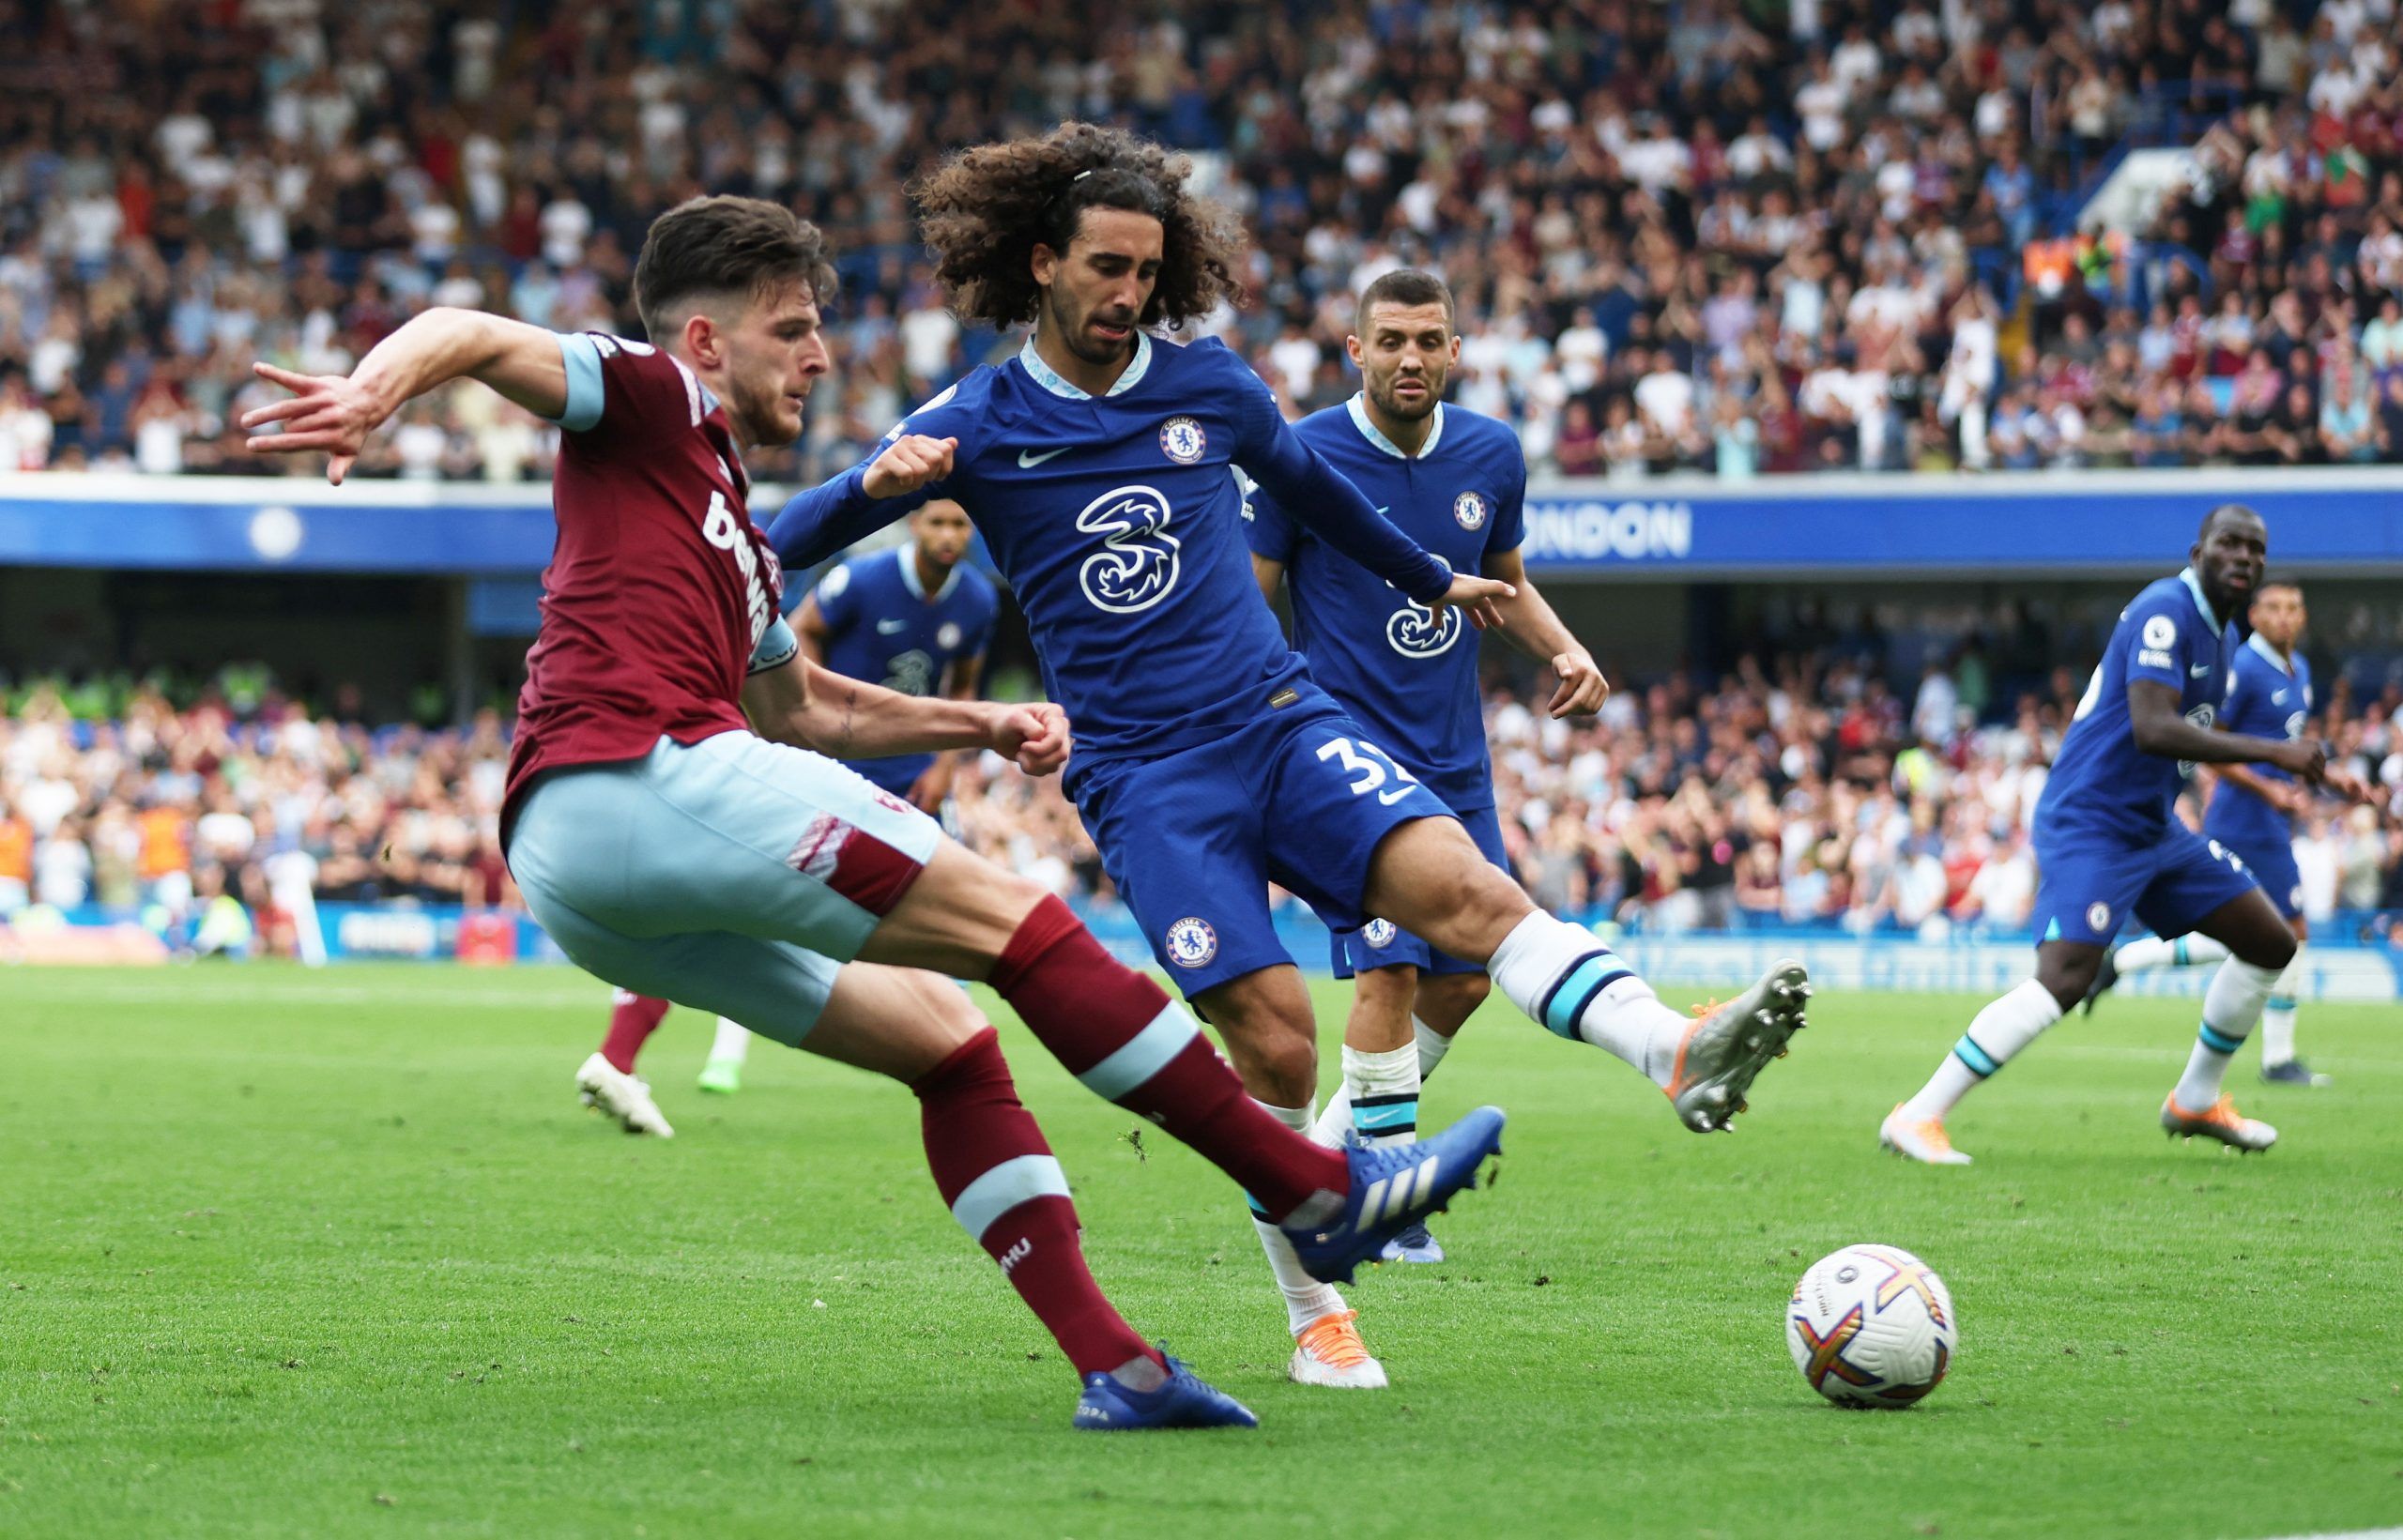 Soccer Football - Premier League - Chelsea v West Ham United - Stamford Bridge, London, Britain - September 3, 2022 Chelsea's Marc Cucurella in action with West Ham United's Declan Rice Action Images via Reuters/Matthew Childs EDITORIAL USE ONLY. No use with unauthorized audio, video, data, fixture lists, club/league logos or 'live' services. Online in-match use limited to 75 images, no video emulation. No use in betting, games or single club /league/player publications.  Please contact your acc